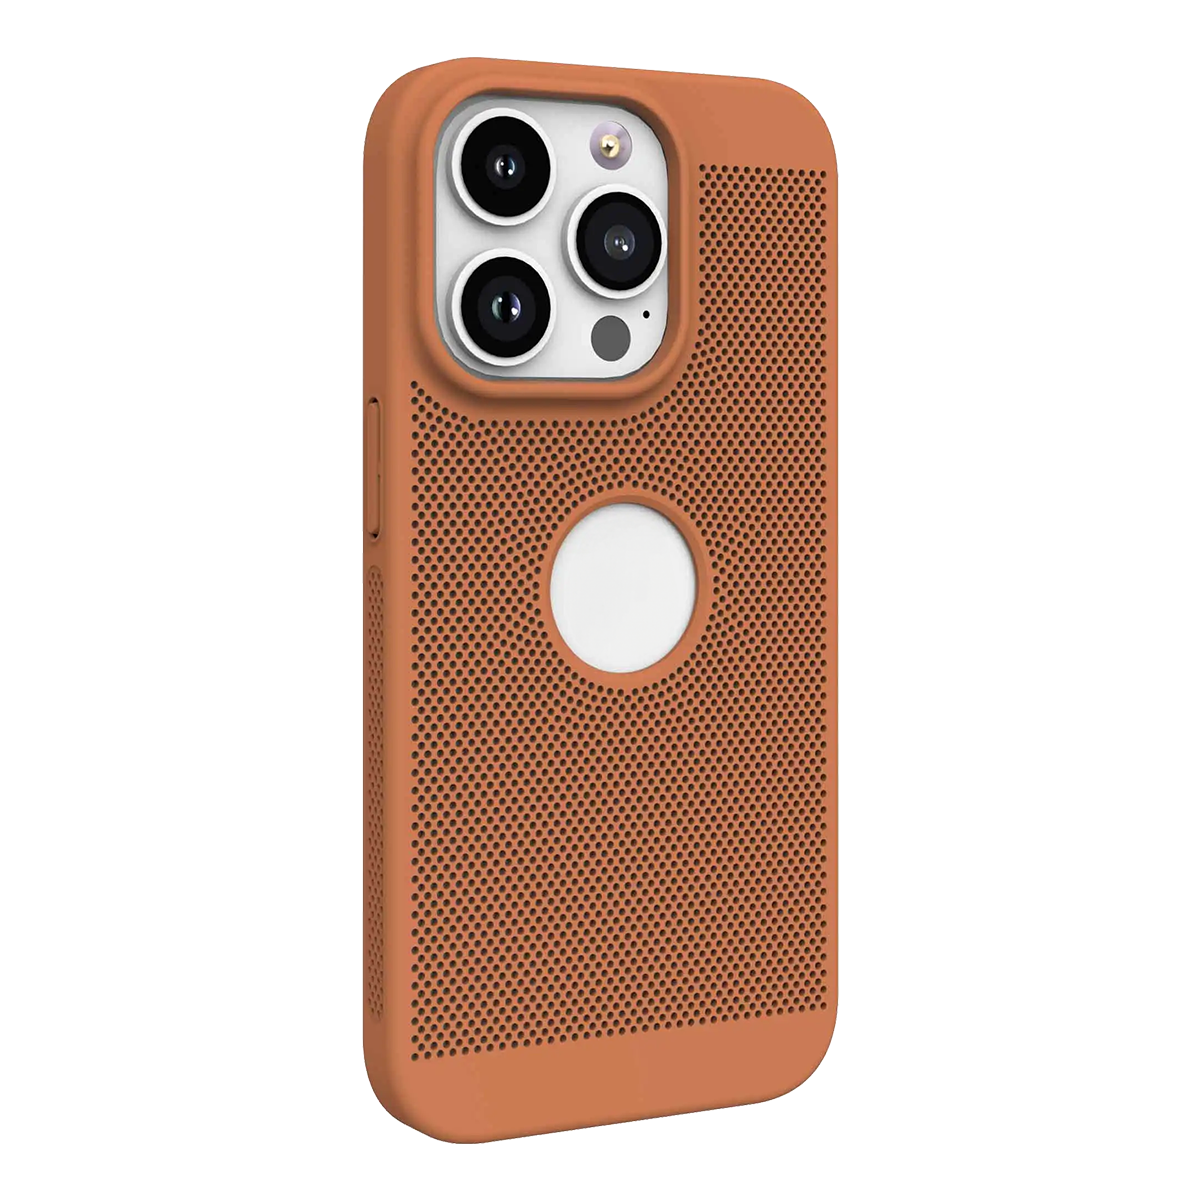 iPhone Back Cover with Heat Dissipation - Bharatcase